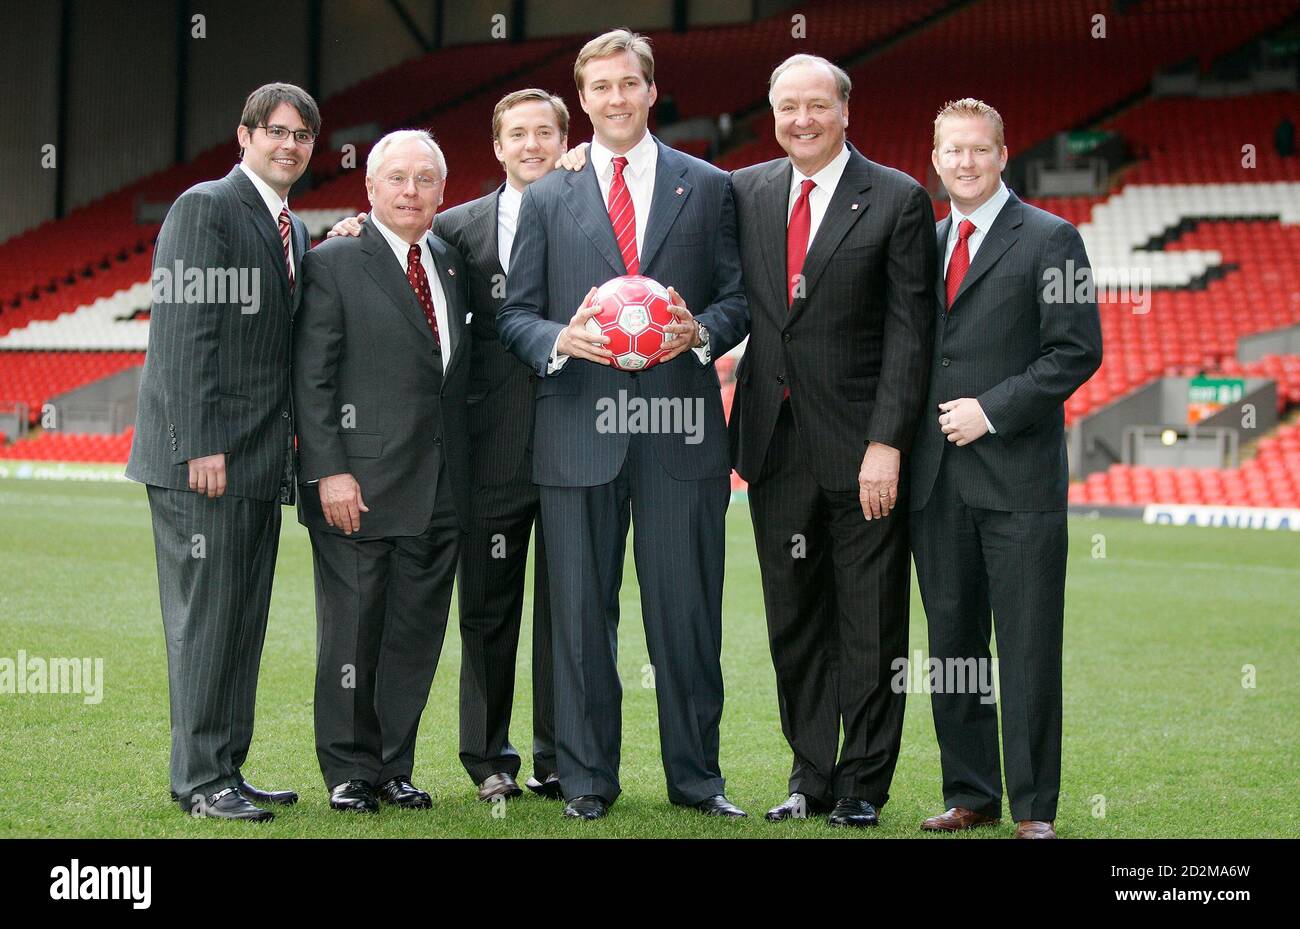 Liverpool Football Club's new owners George Gillett (2nd L) and Tom Hicks  (2nd R) pose for photographers with their family members in front of the  club's Kop stand at Anfield in Liverpool,